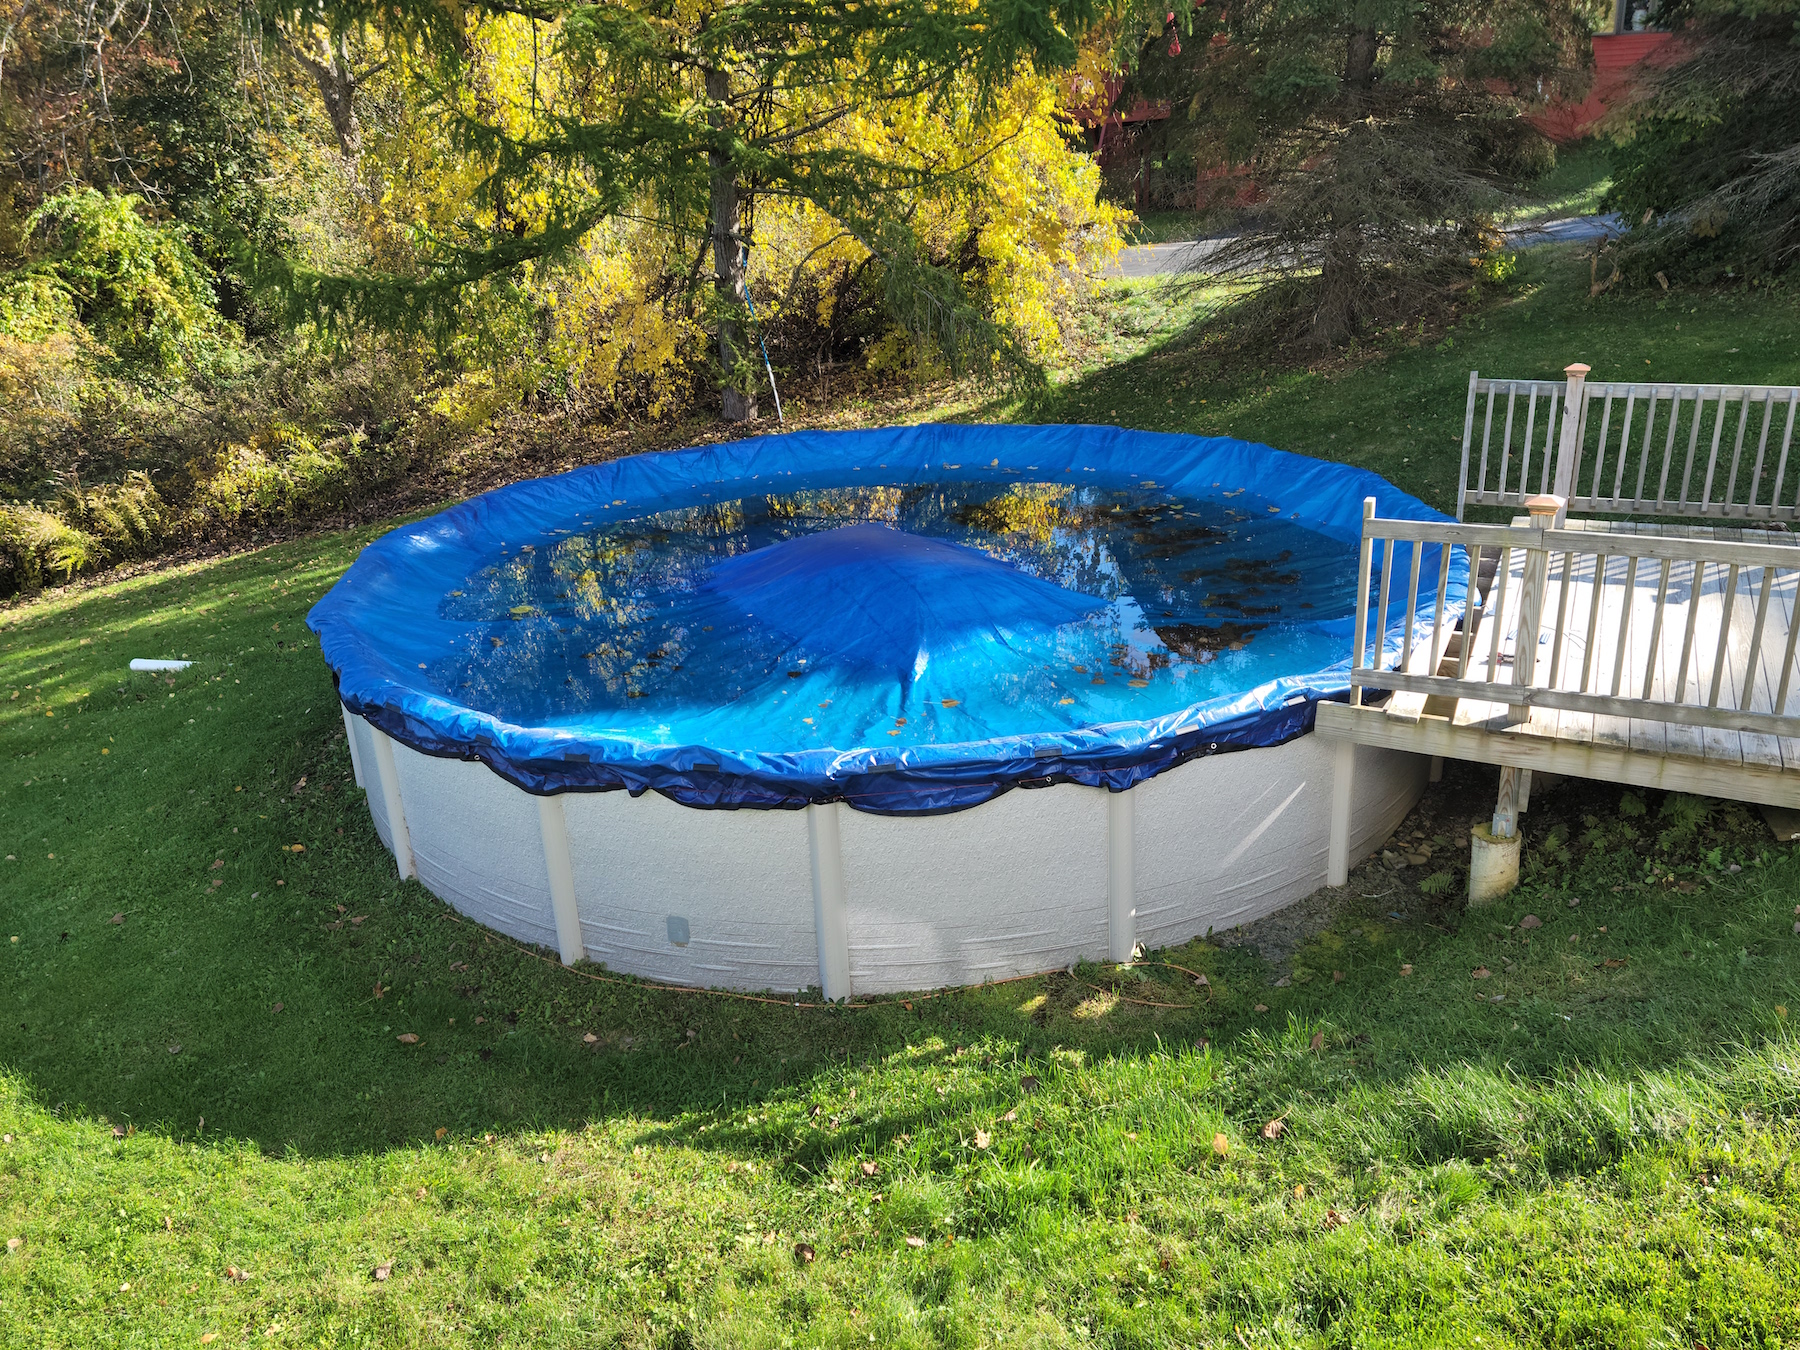 A large round pool closed for the winter with blue cover and wood deck.